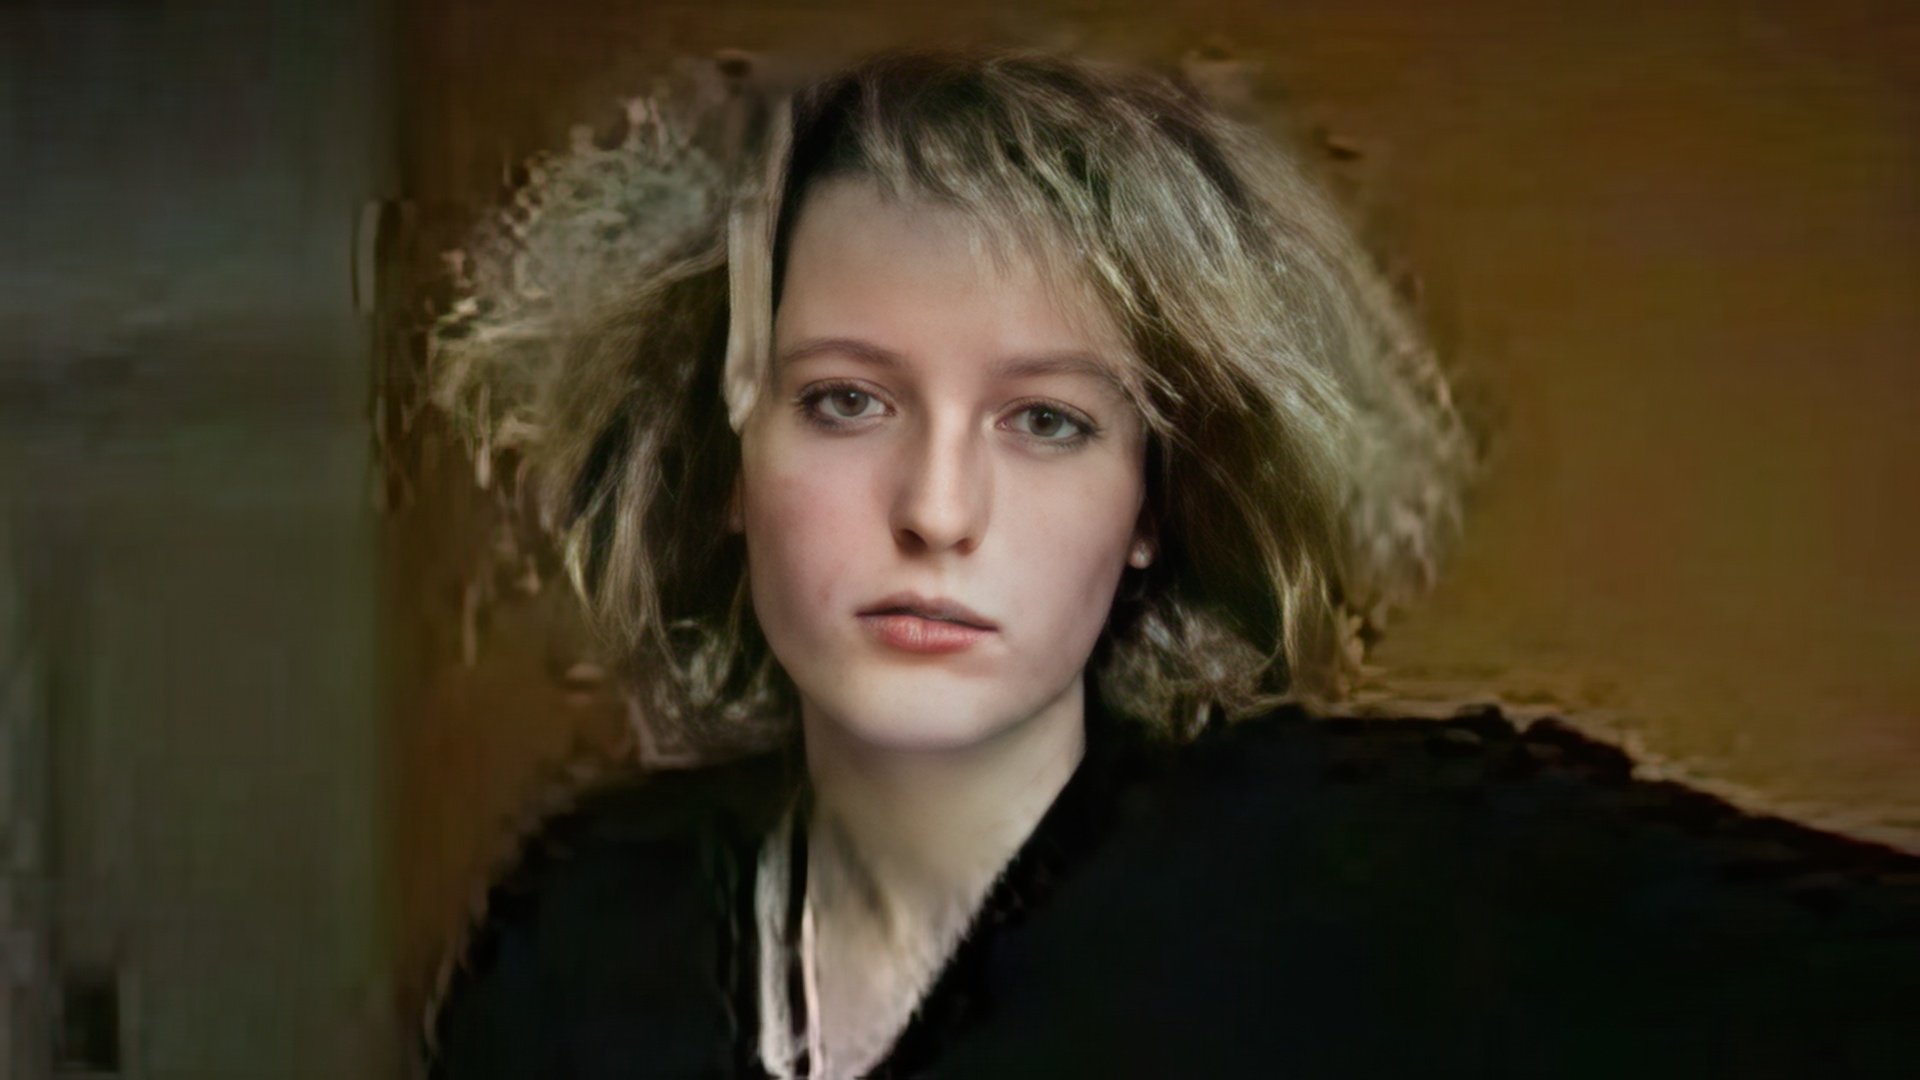 Gillian Anderson in her youth